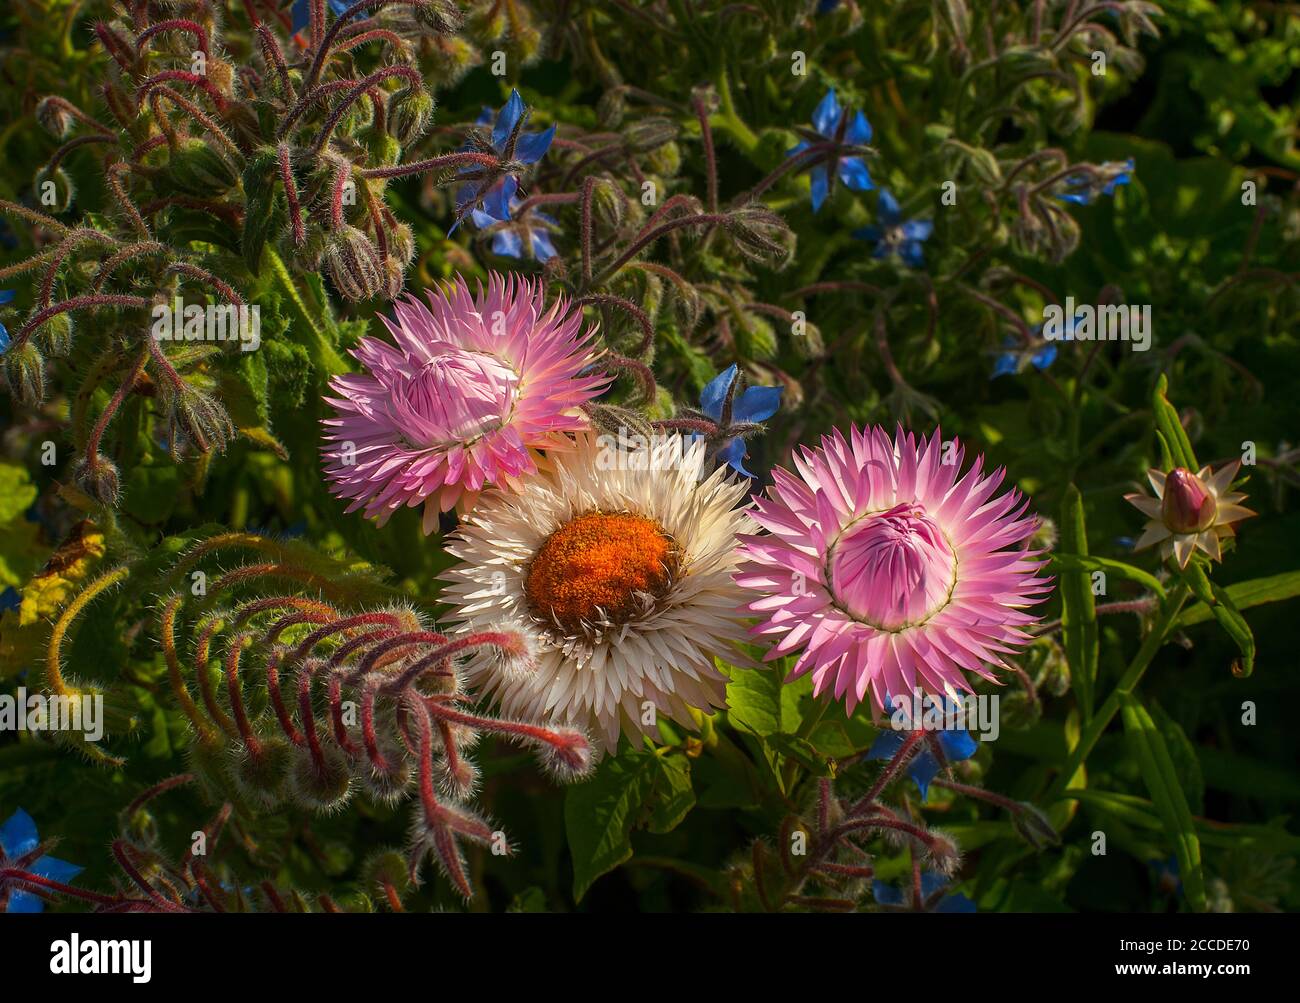 Three Aster and Anemone Flowers In Glade Stock Photo